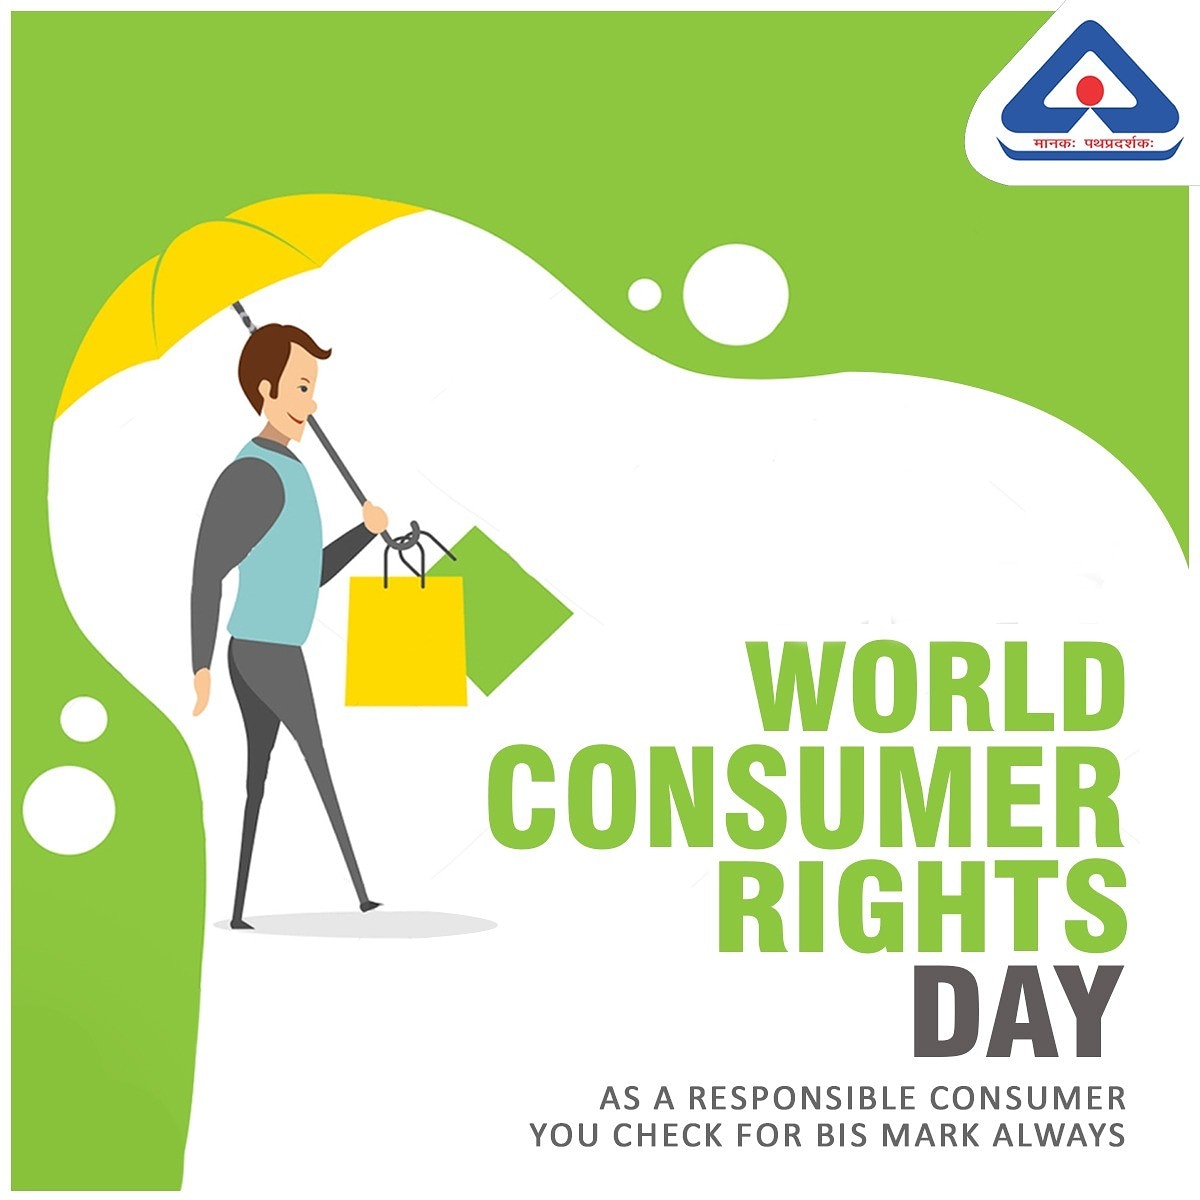 #WorldConsumerRightsDay is celebrated every year on 15 March as a means of raising global awareness about consumer rights and needs.
#ISIMarkAlways
#BISAlways
@IndianStandards @RajCMO @pmo